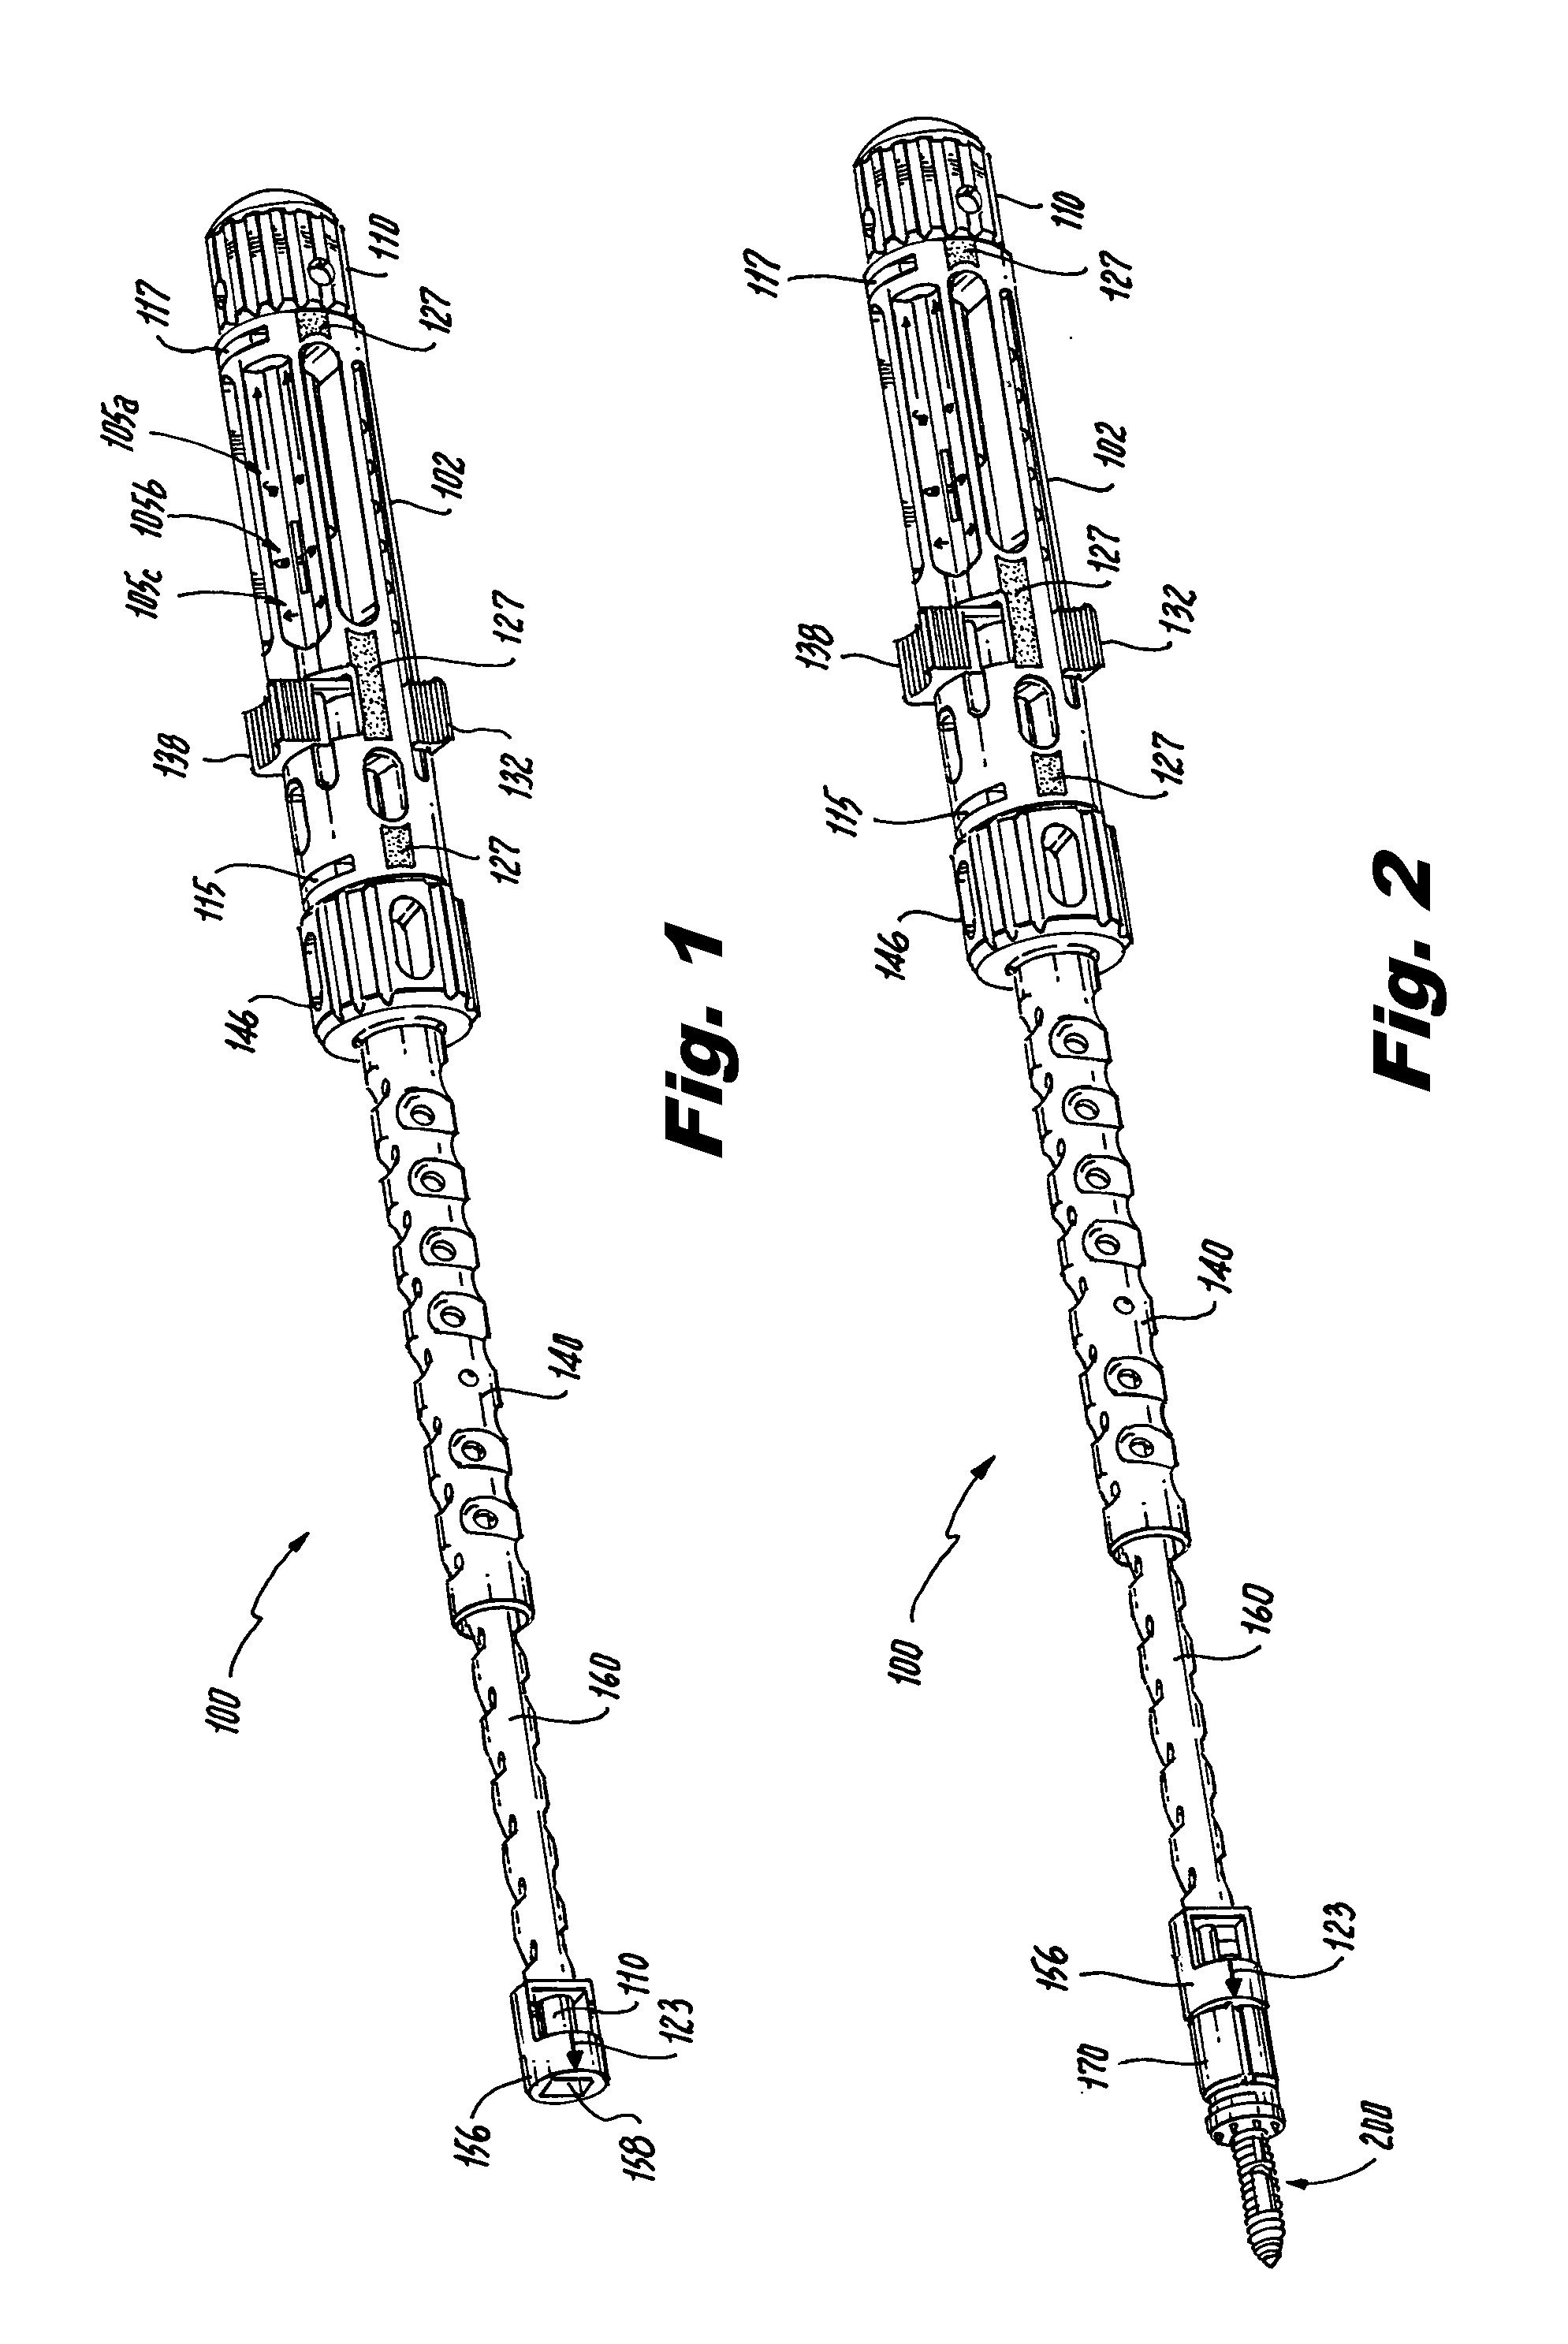 Instrument for inserting an interspinous process implant